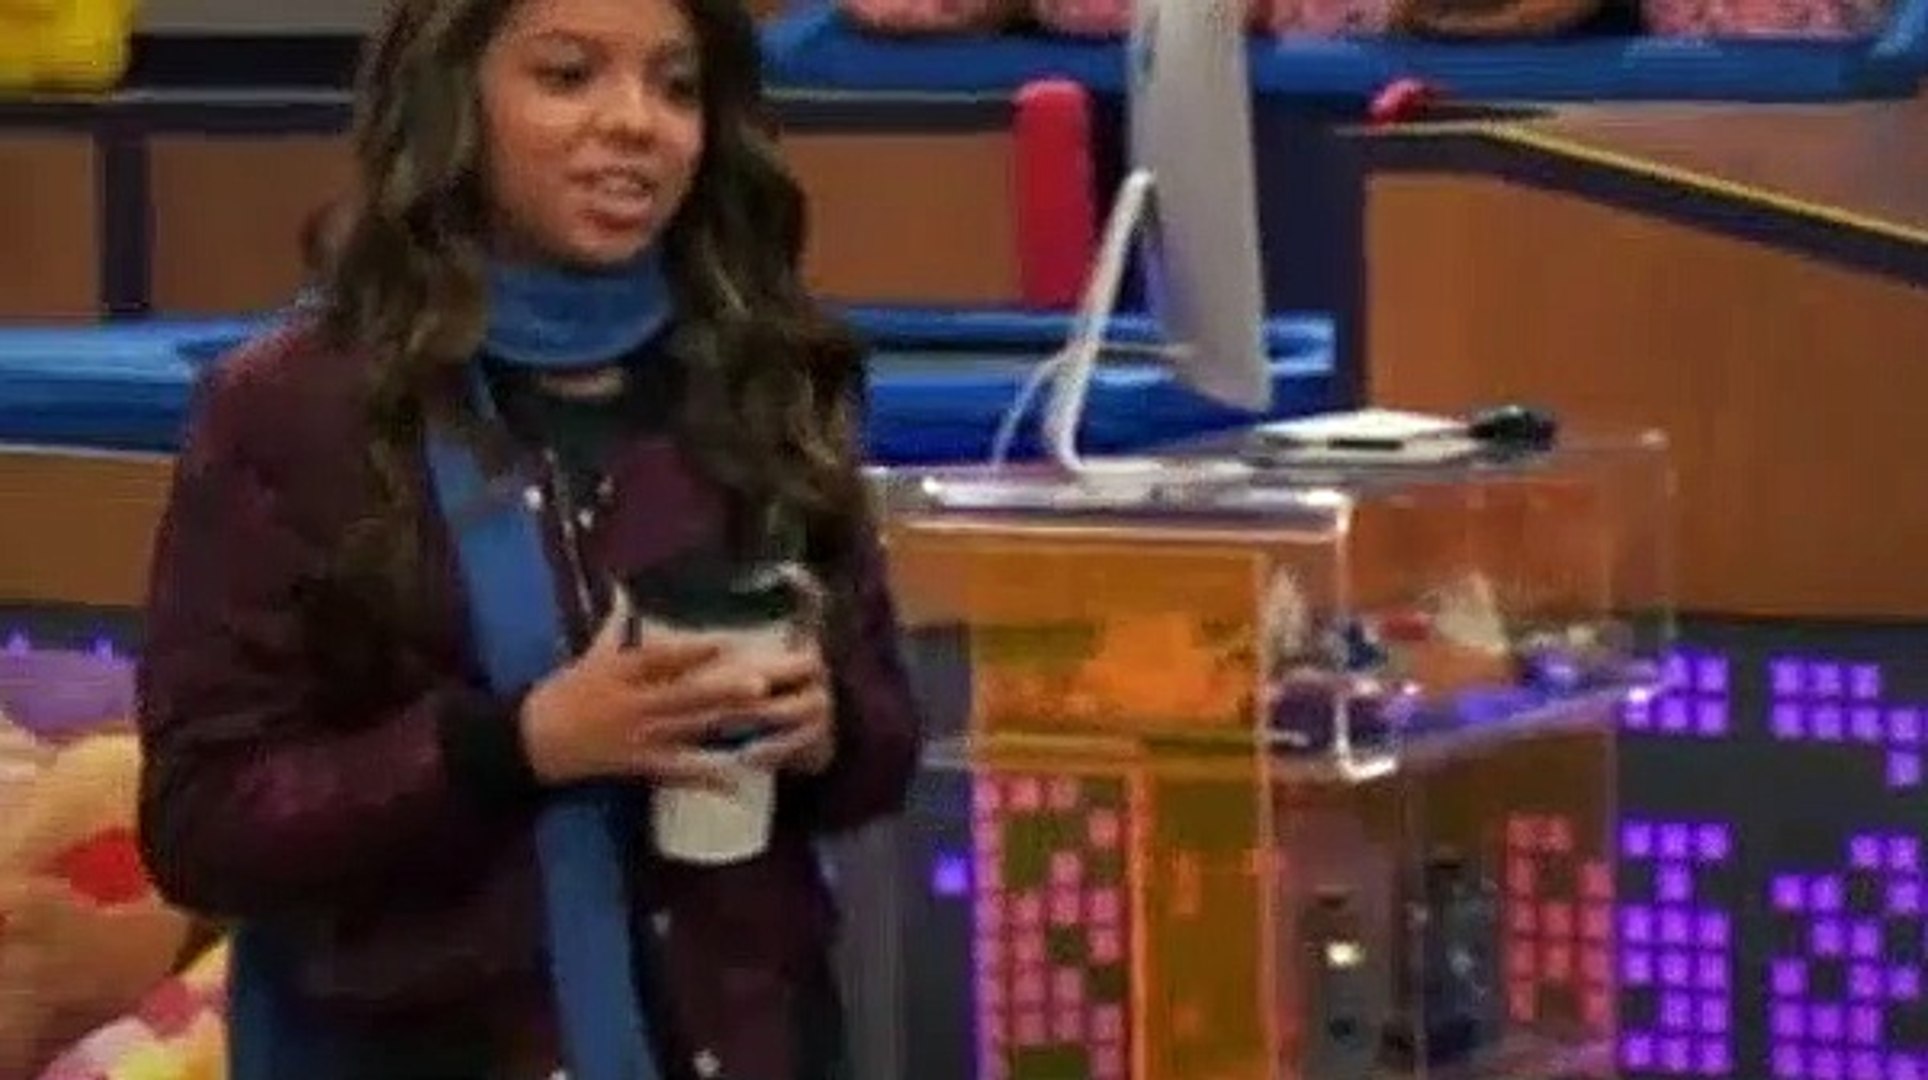 Game Shakers Season 3 Episode 5 Babe and The Boys Video - video